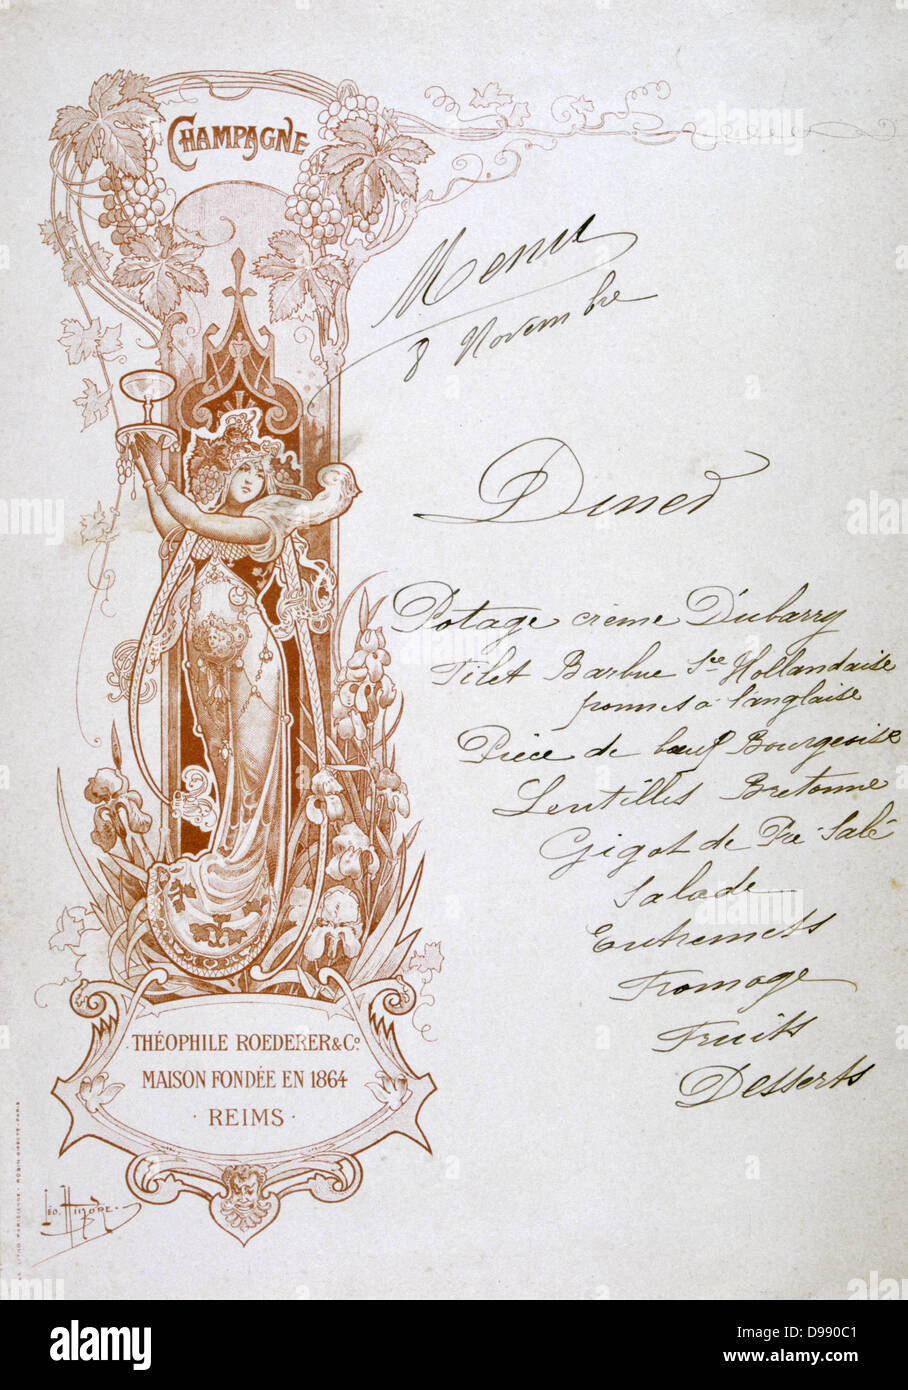 Dinner menu hand-written on a publicity card for Theophile Roederer & Co. Champagne, late 19th century. Food Alcohol Advertising Stock Photo